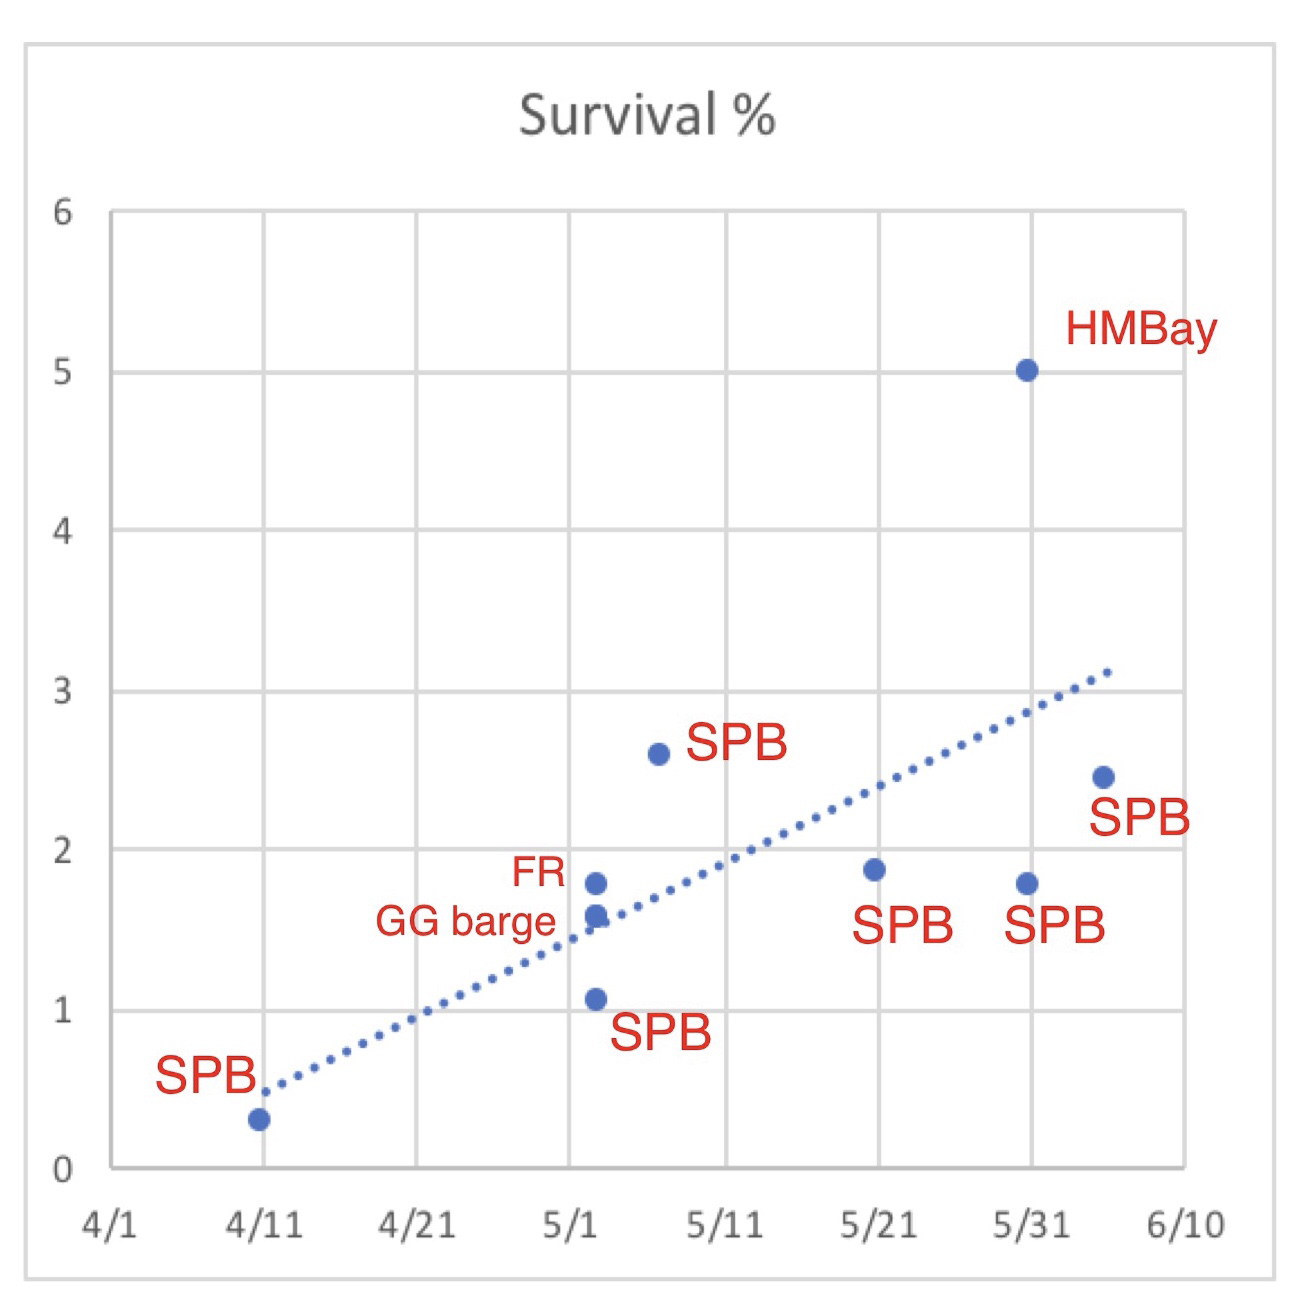 Figure 1. Survival rates for brood year 2011 Feather River Hatchery smolts released in spring 2012. GG is Golden Gate. SPB is San Pablo Bay. FR is Feather River. HMBay is Half Moon Bay along the coast south of San Francisco.